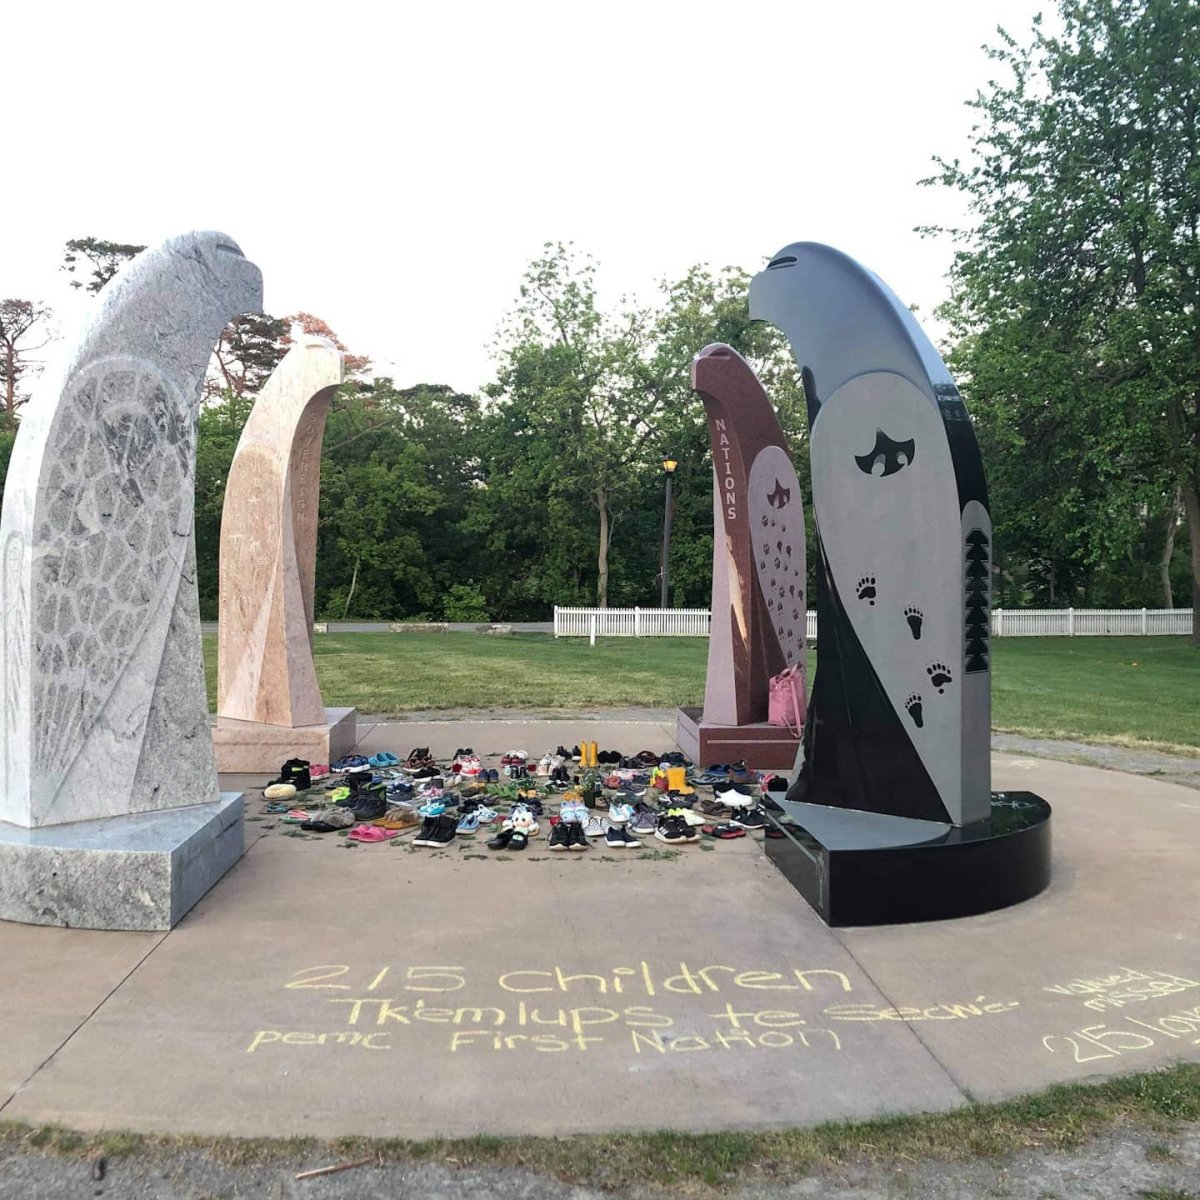 Hundreds of pairs of shoes were recently placed at the Eagles Among Us monument at Battlefield House, in response to the discovery of unmarked graves at a former residential school site in B.C.